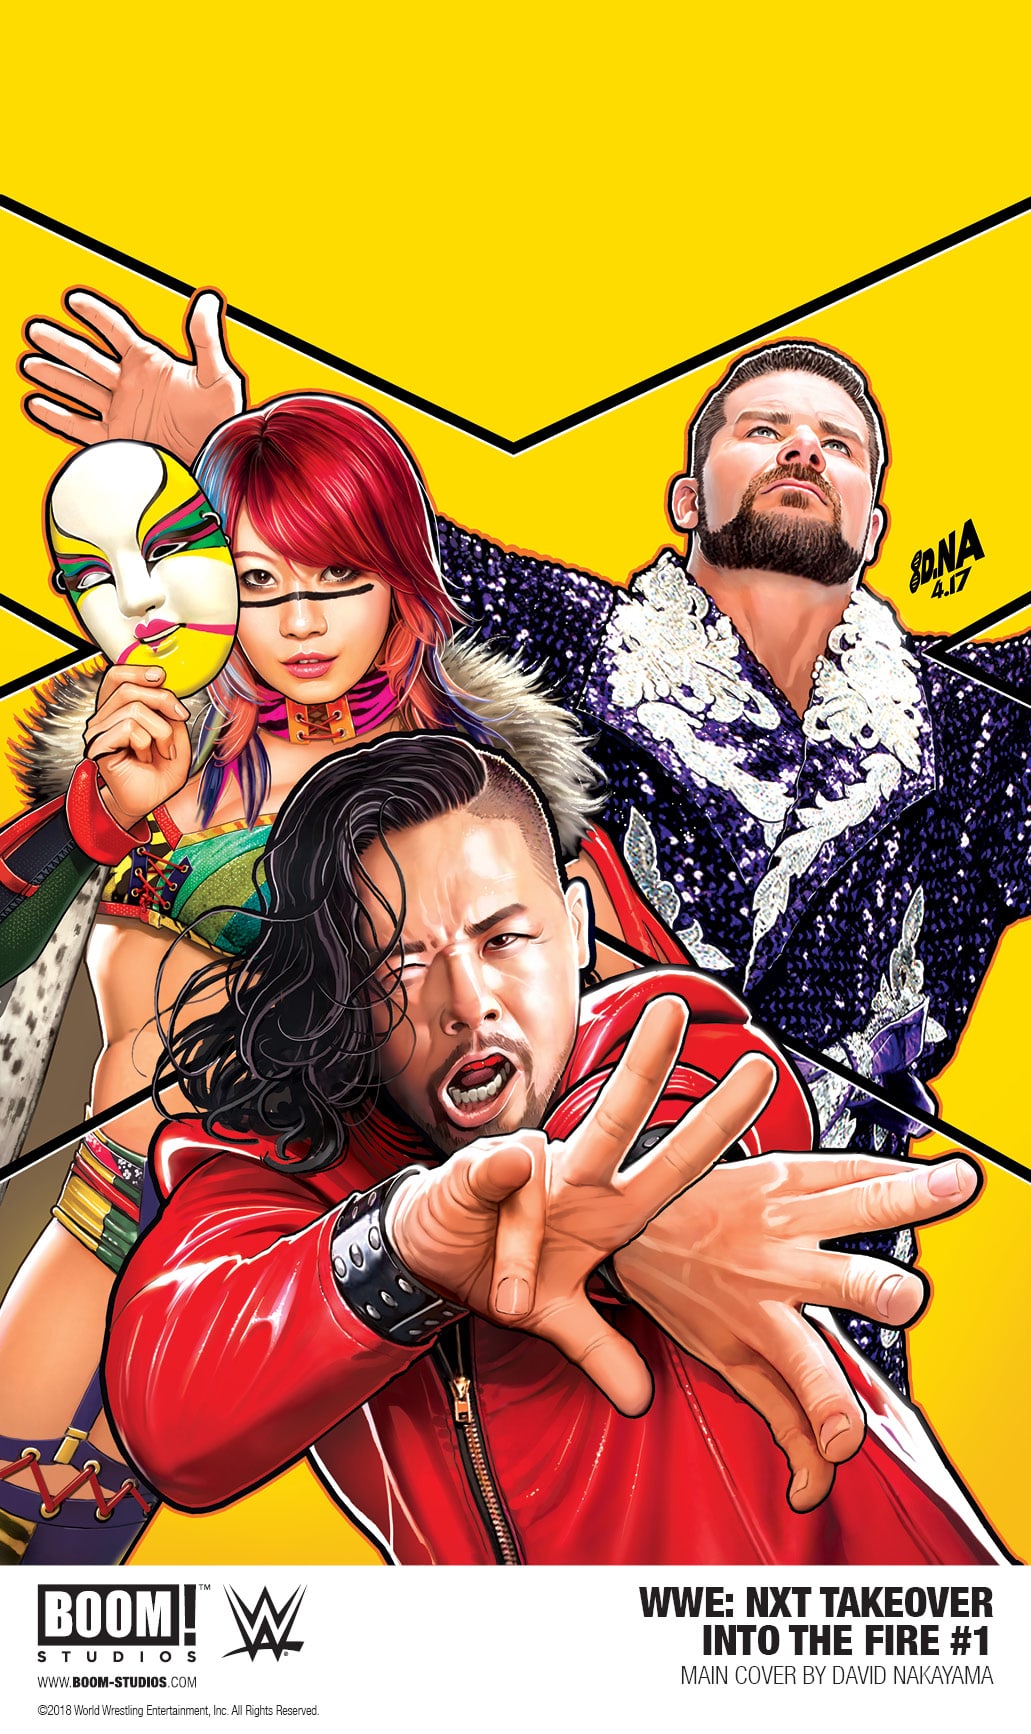 NXT Takeover takes over BOOM! Studios for 4 weeks in September